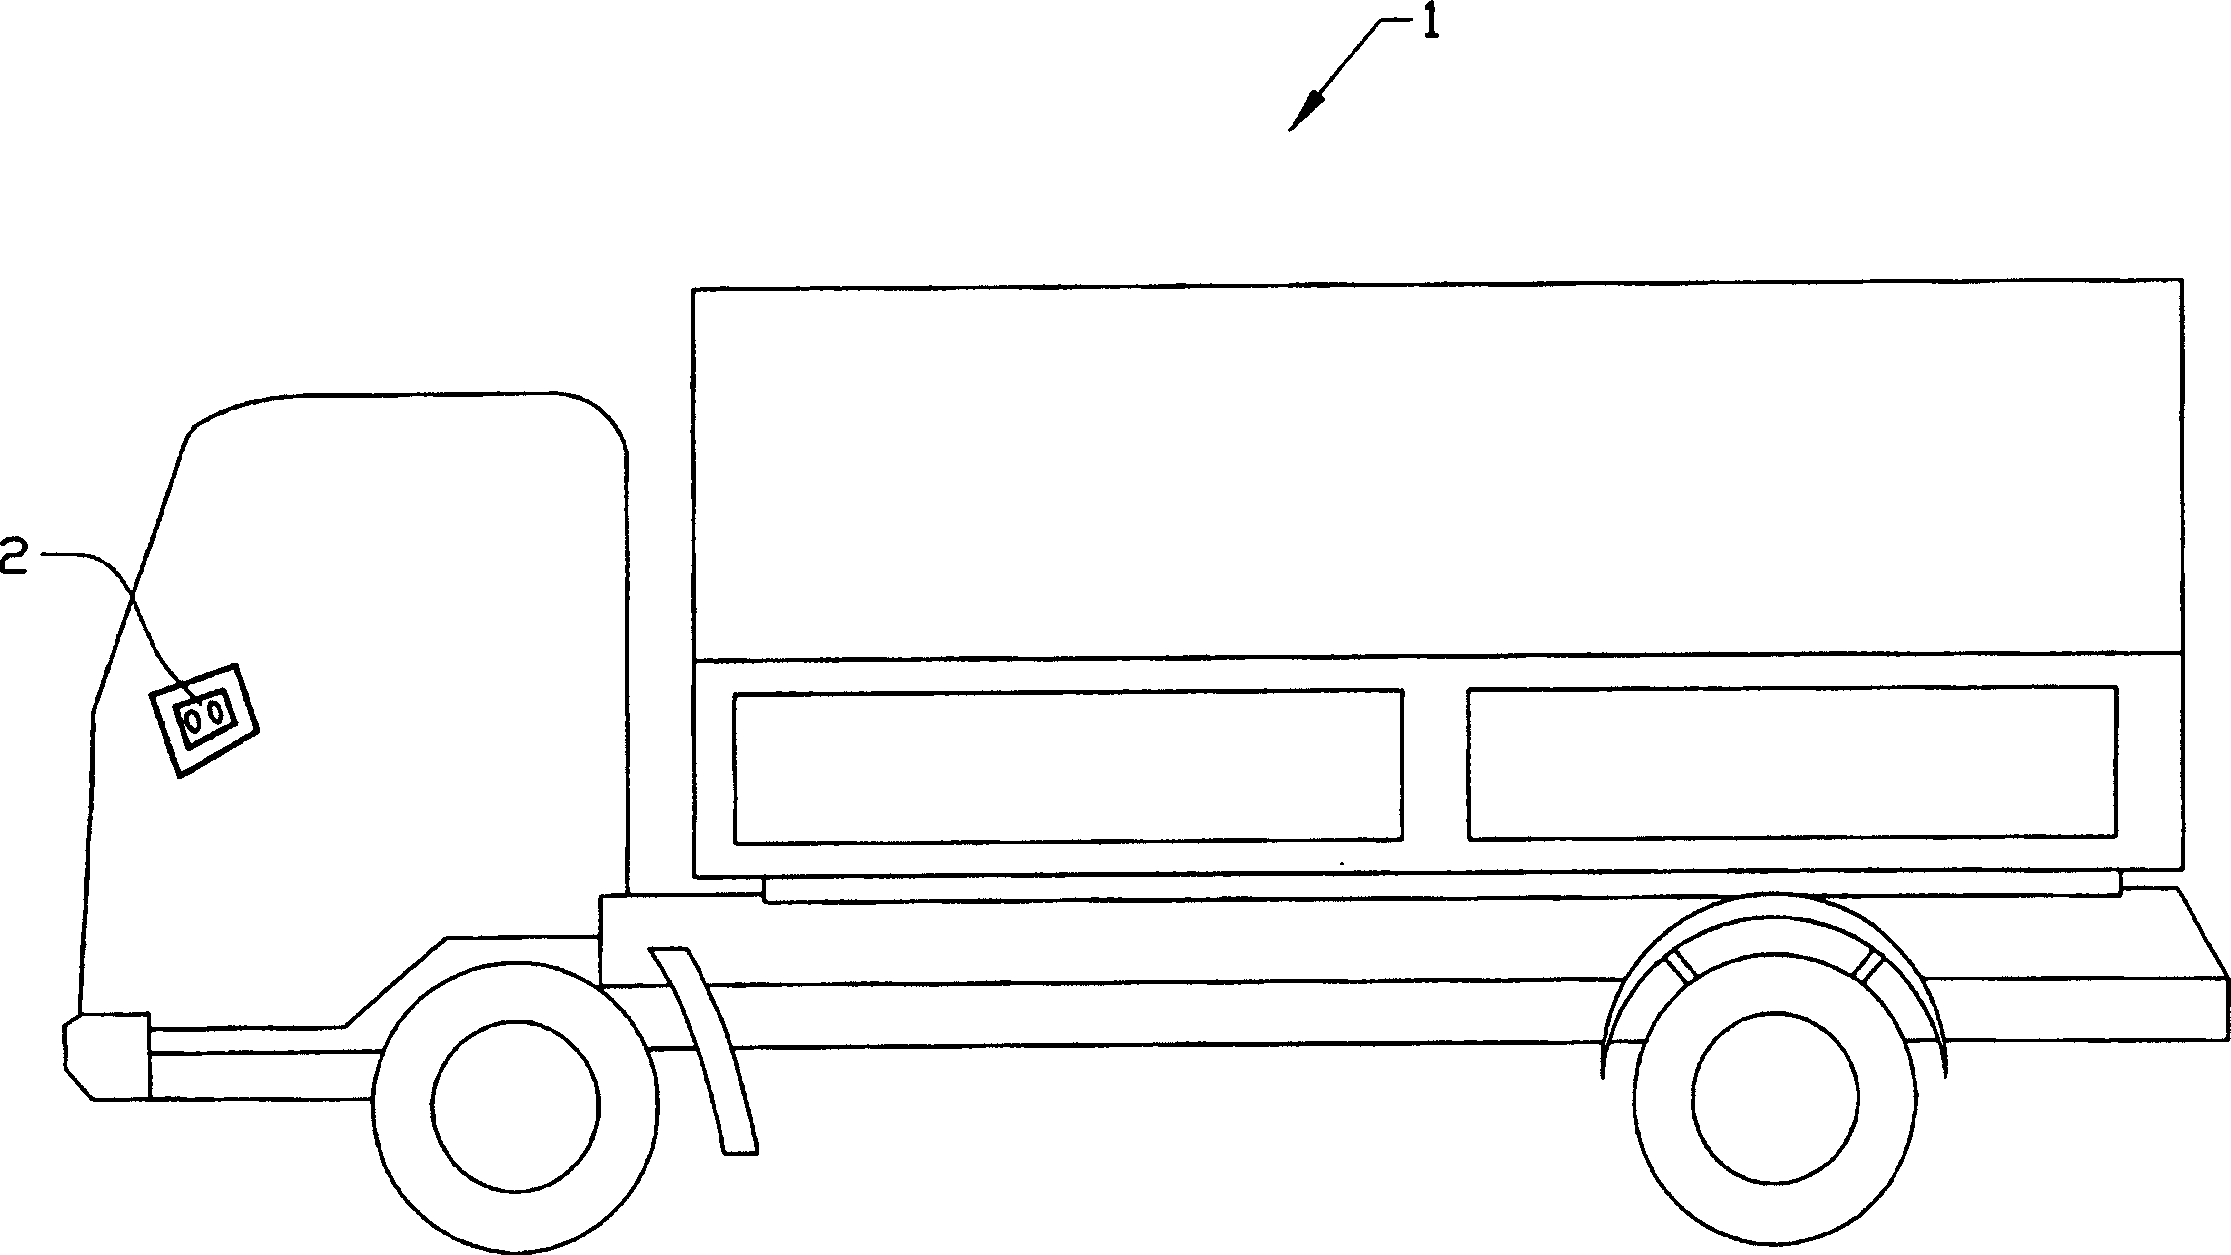 Device for indicating an operational state of a vehicle